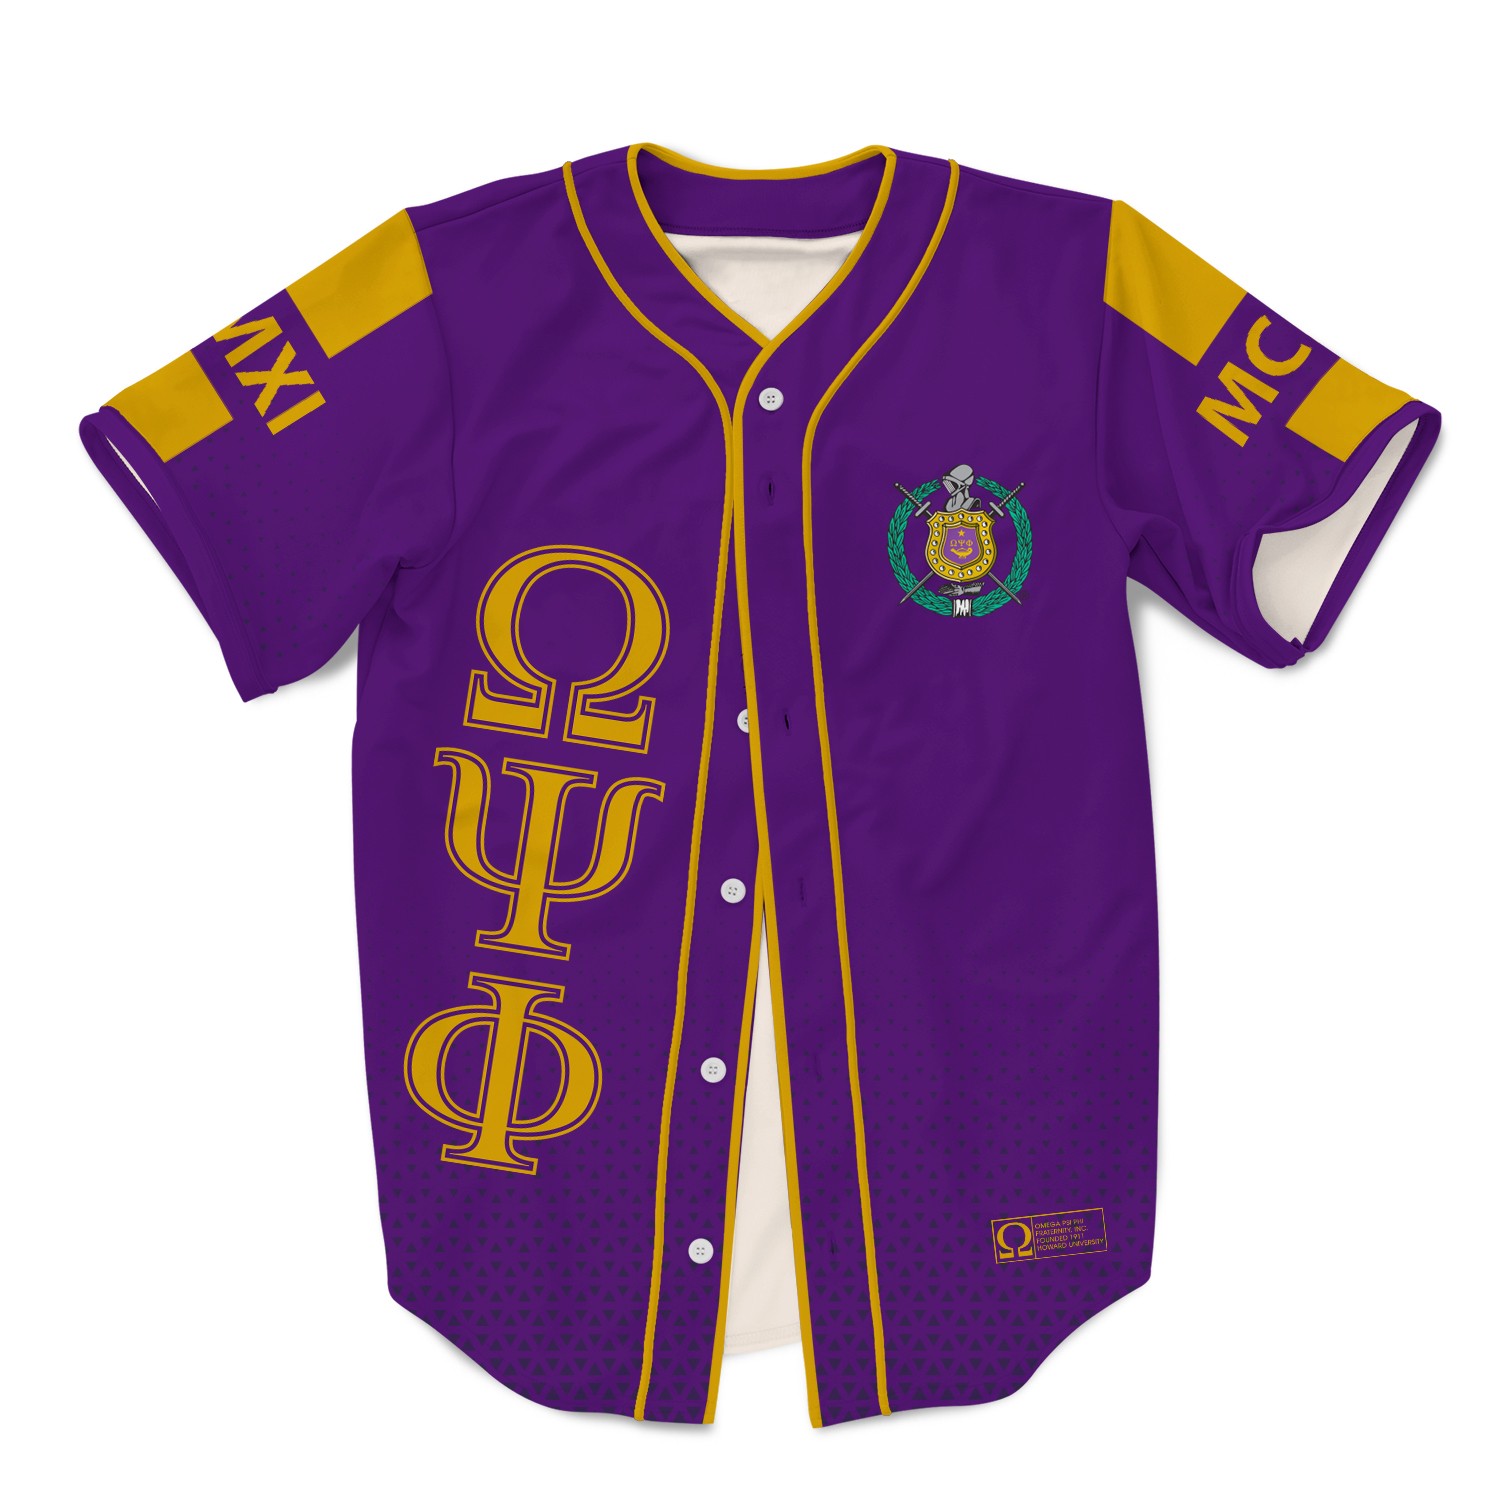  Bad Bananas Omega Psi Phi Fraternity - Athletic Jersey - Hockey  Style - Big Blocks - Official Vendor : Clothing, Shoes & Jewelry